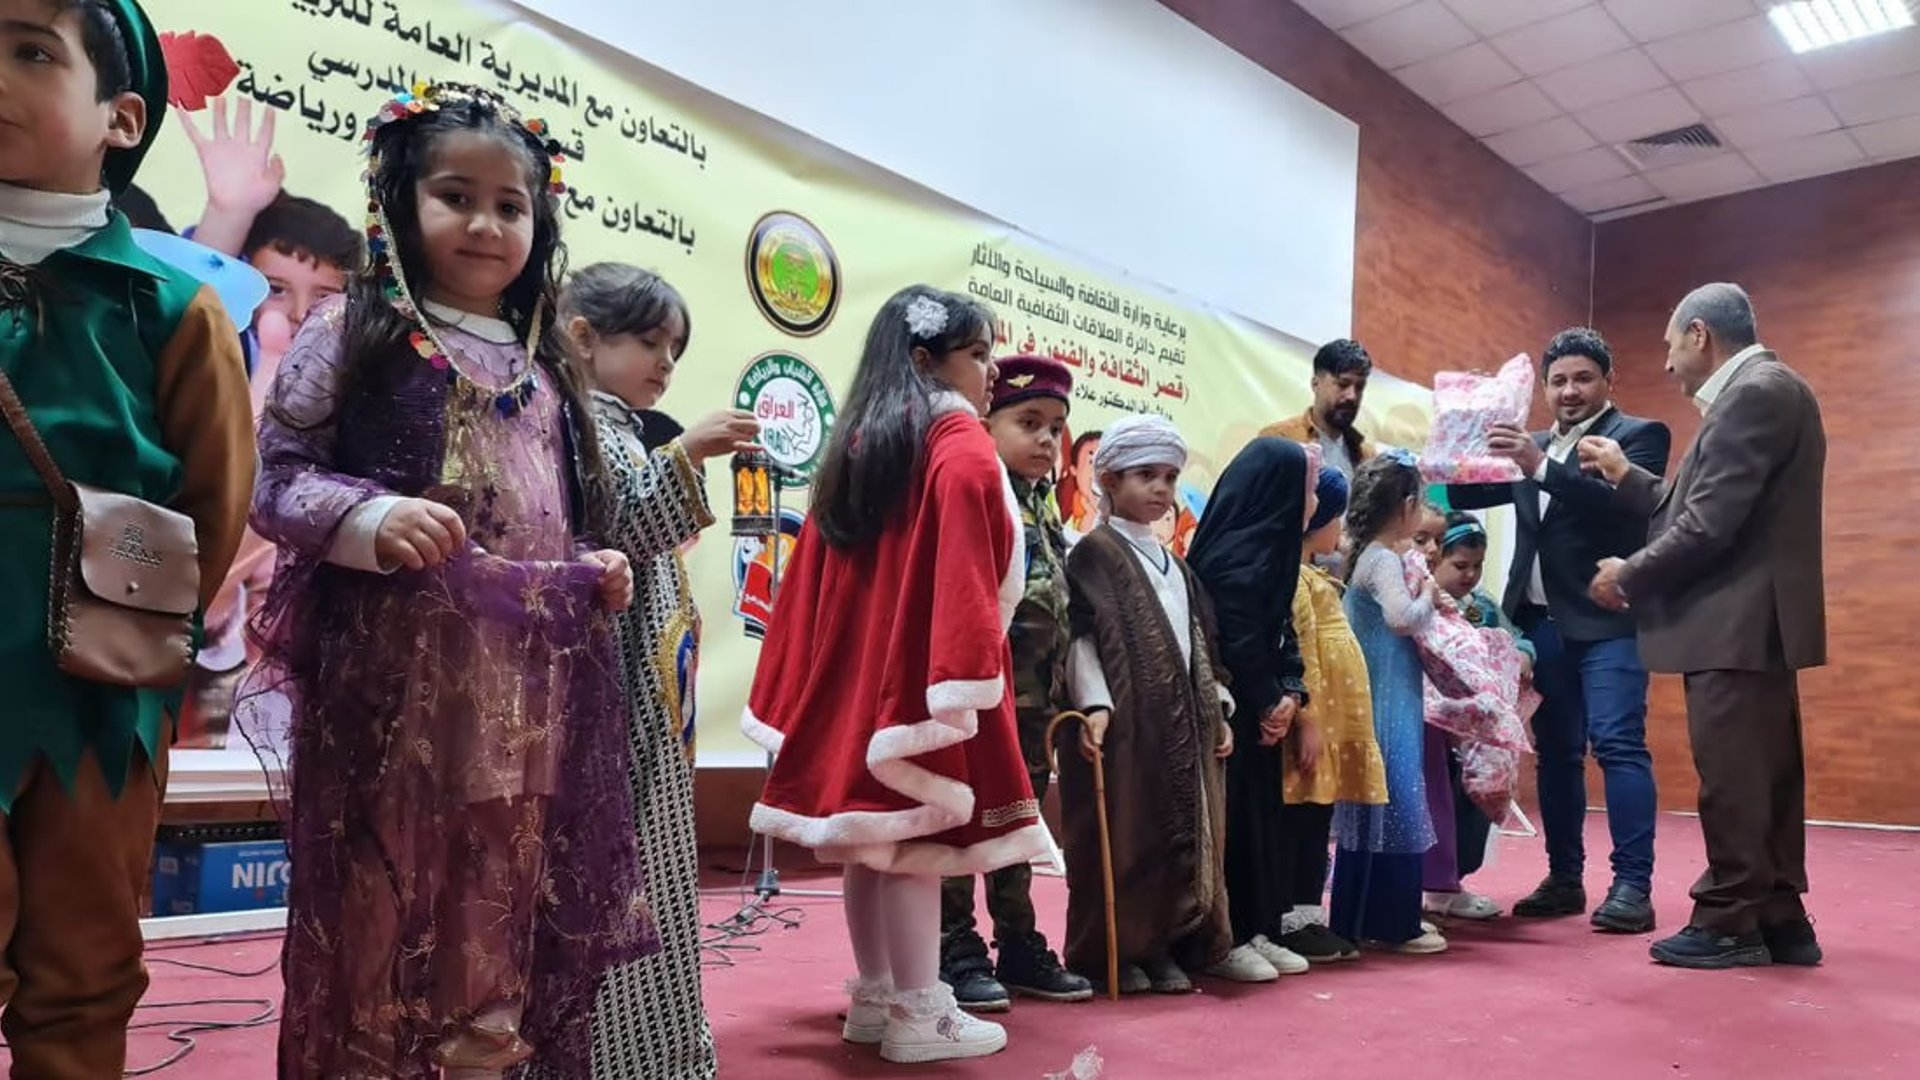 Cultural festival in Muthanna supports childrens development through theater and art